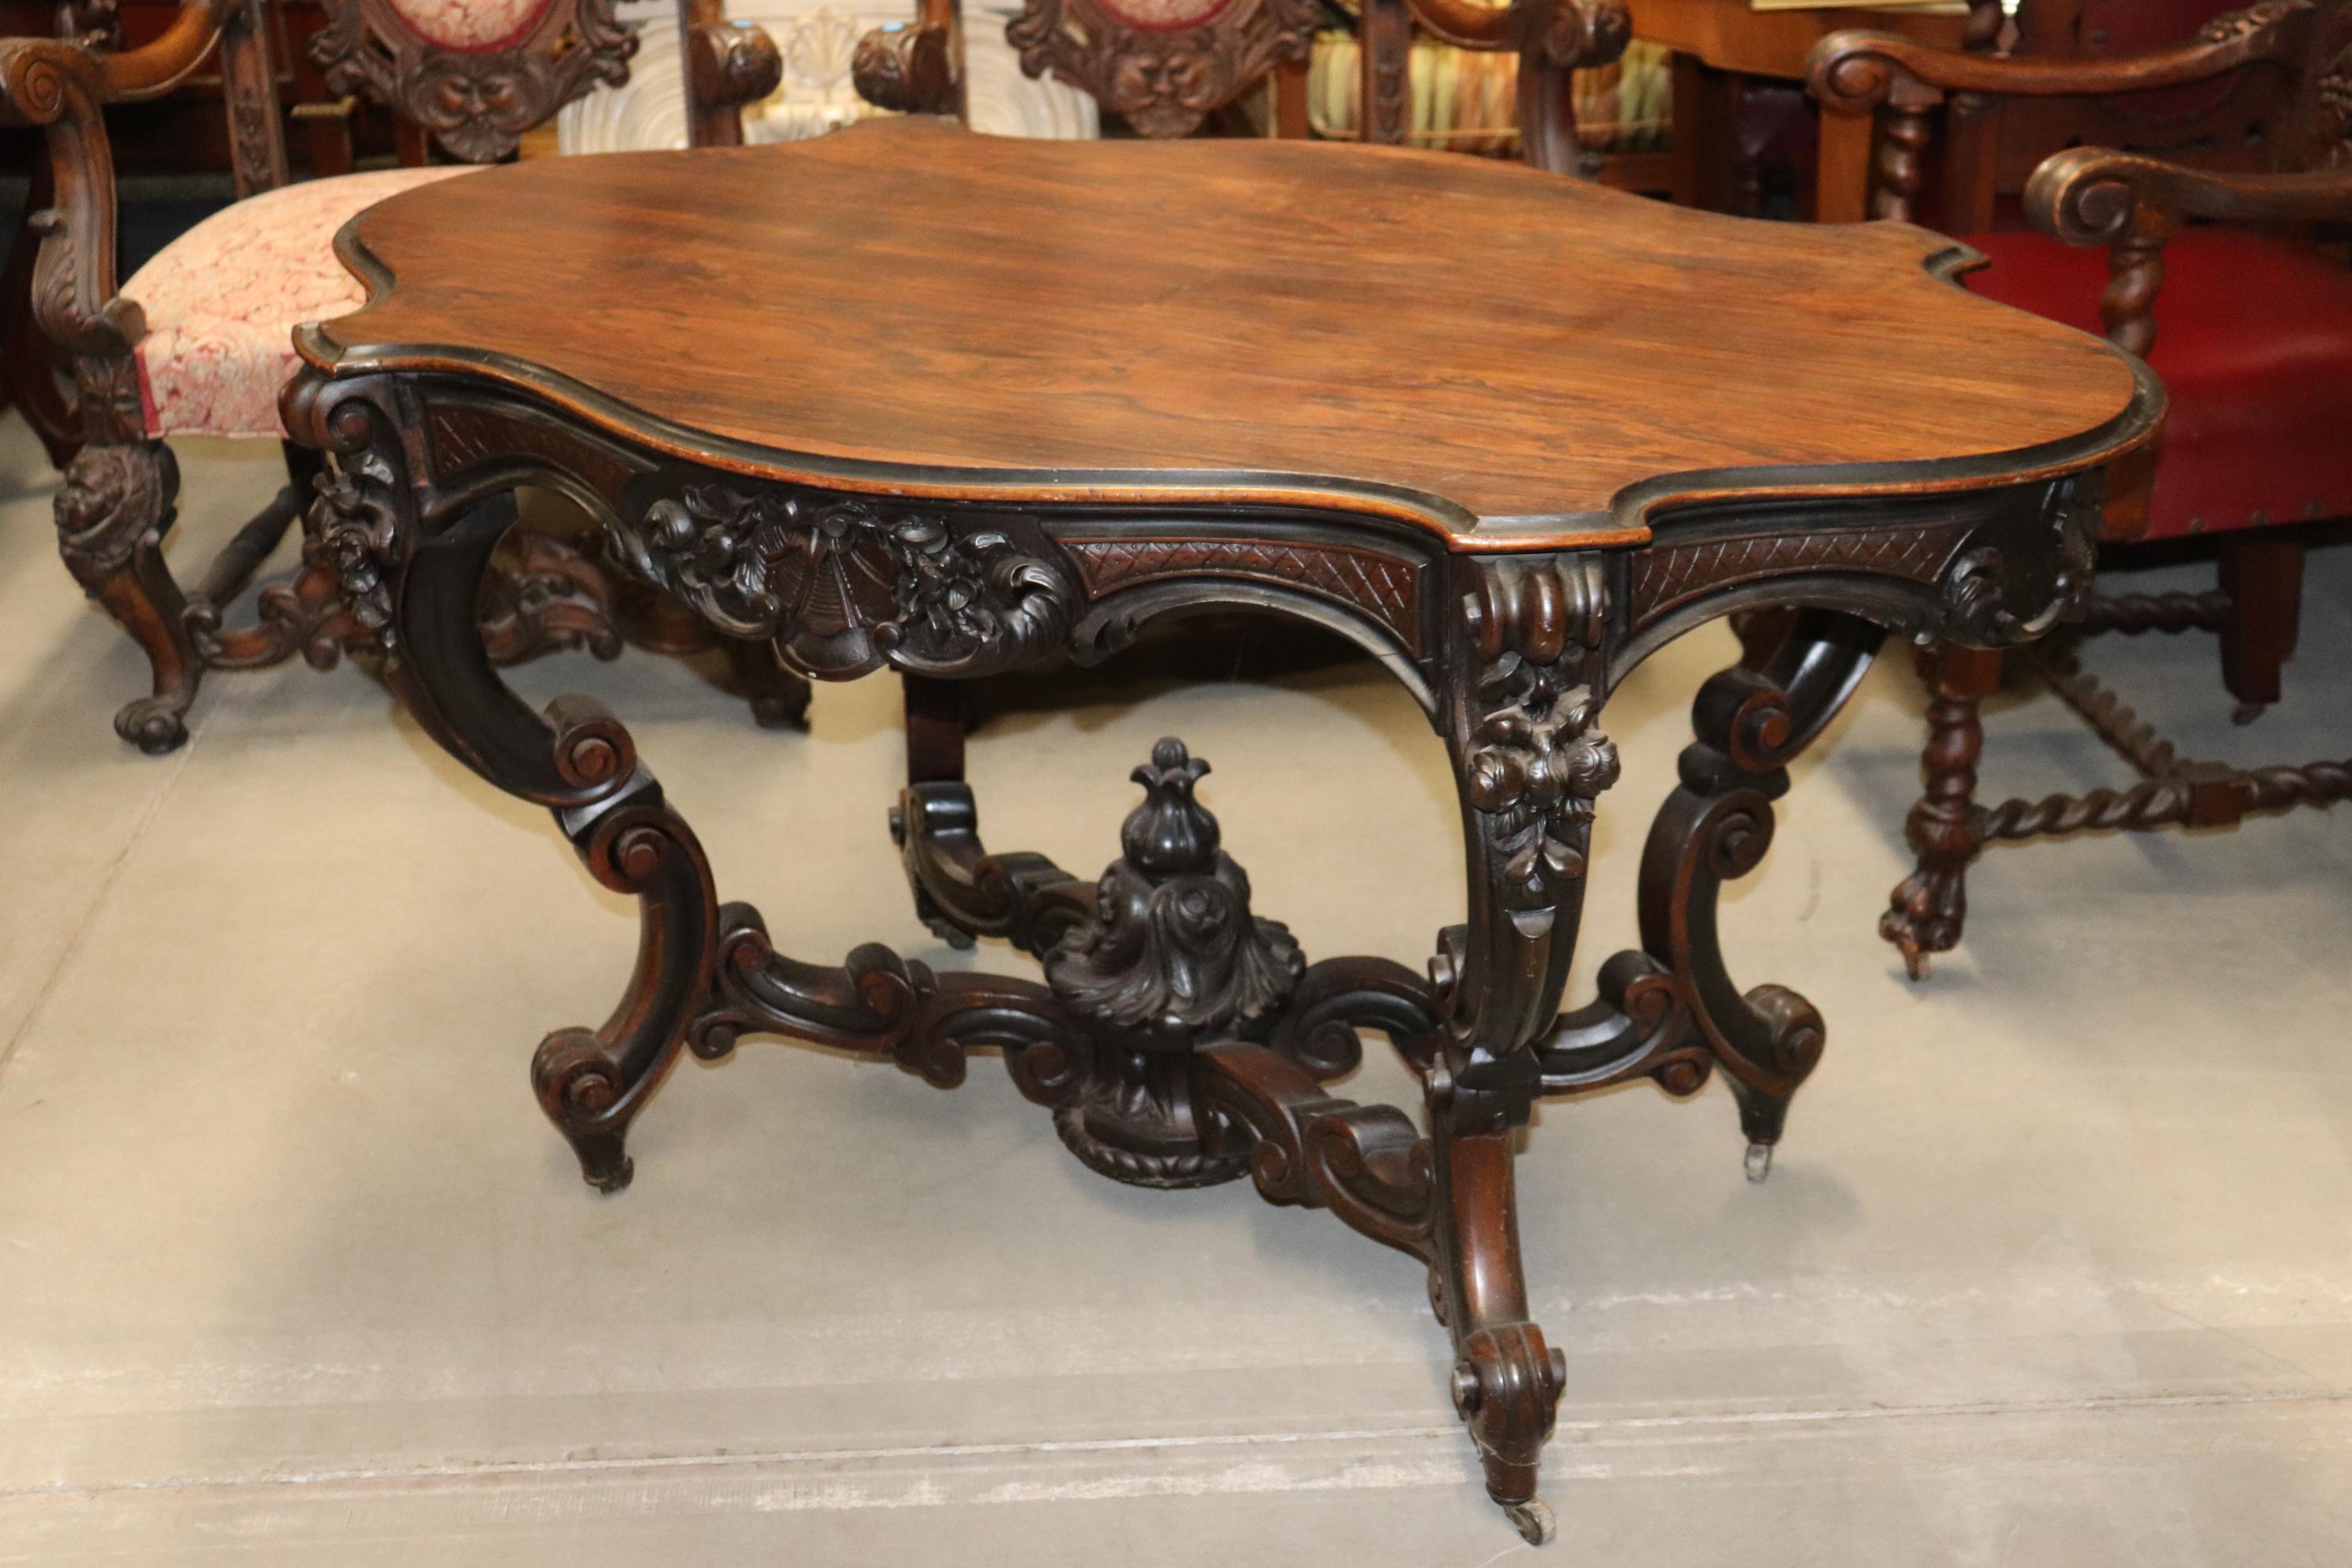 Made in the style of Meeks, this gorgeous American Victorian rococo center table features a fine original finish and beautiful design and wood quality. The table measures 56 wide x 34 deep x 30 tall. Dates to the 1860s era.